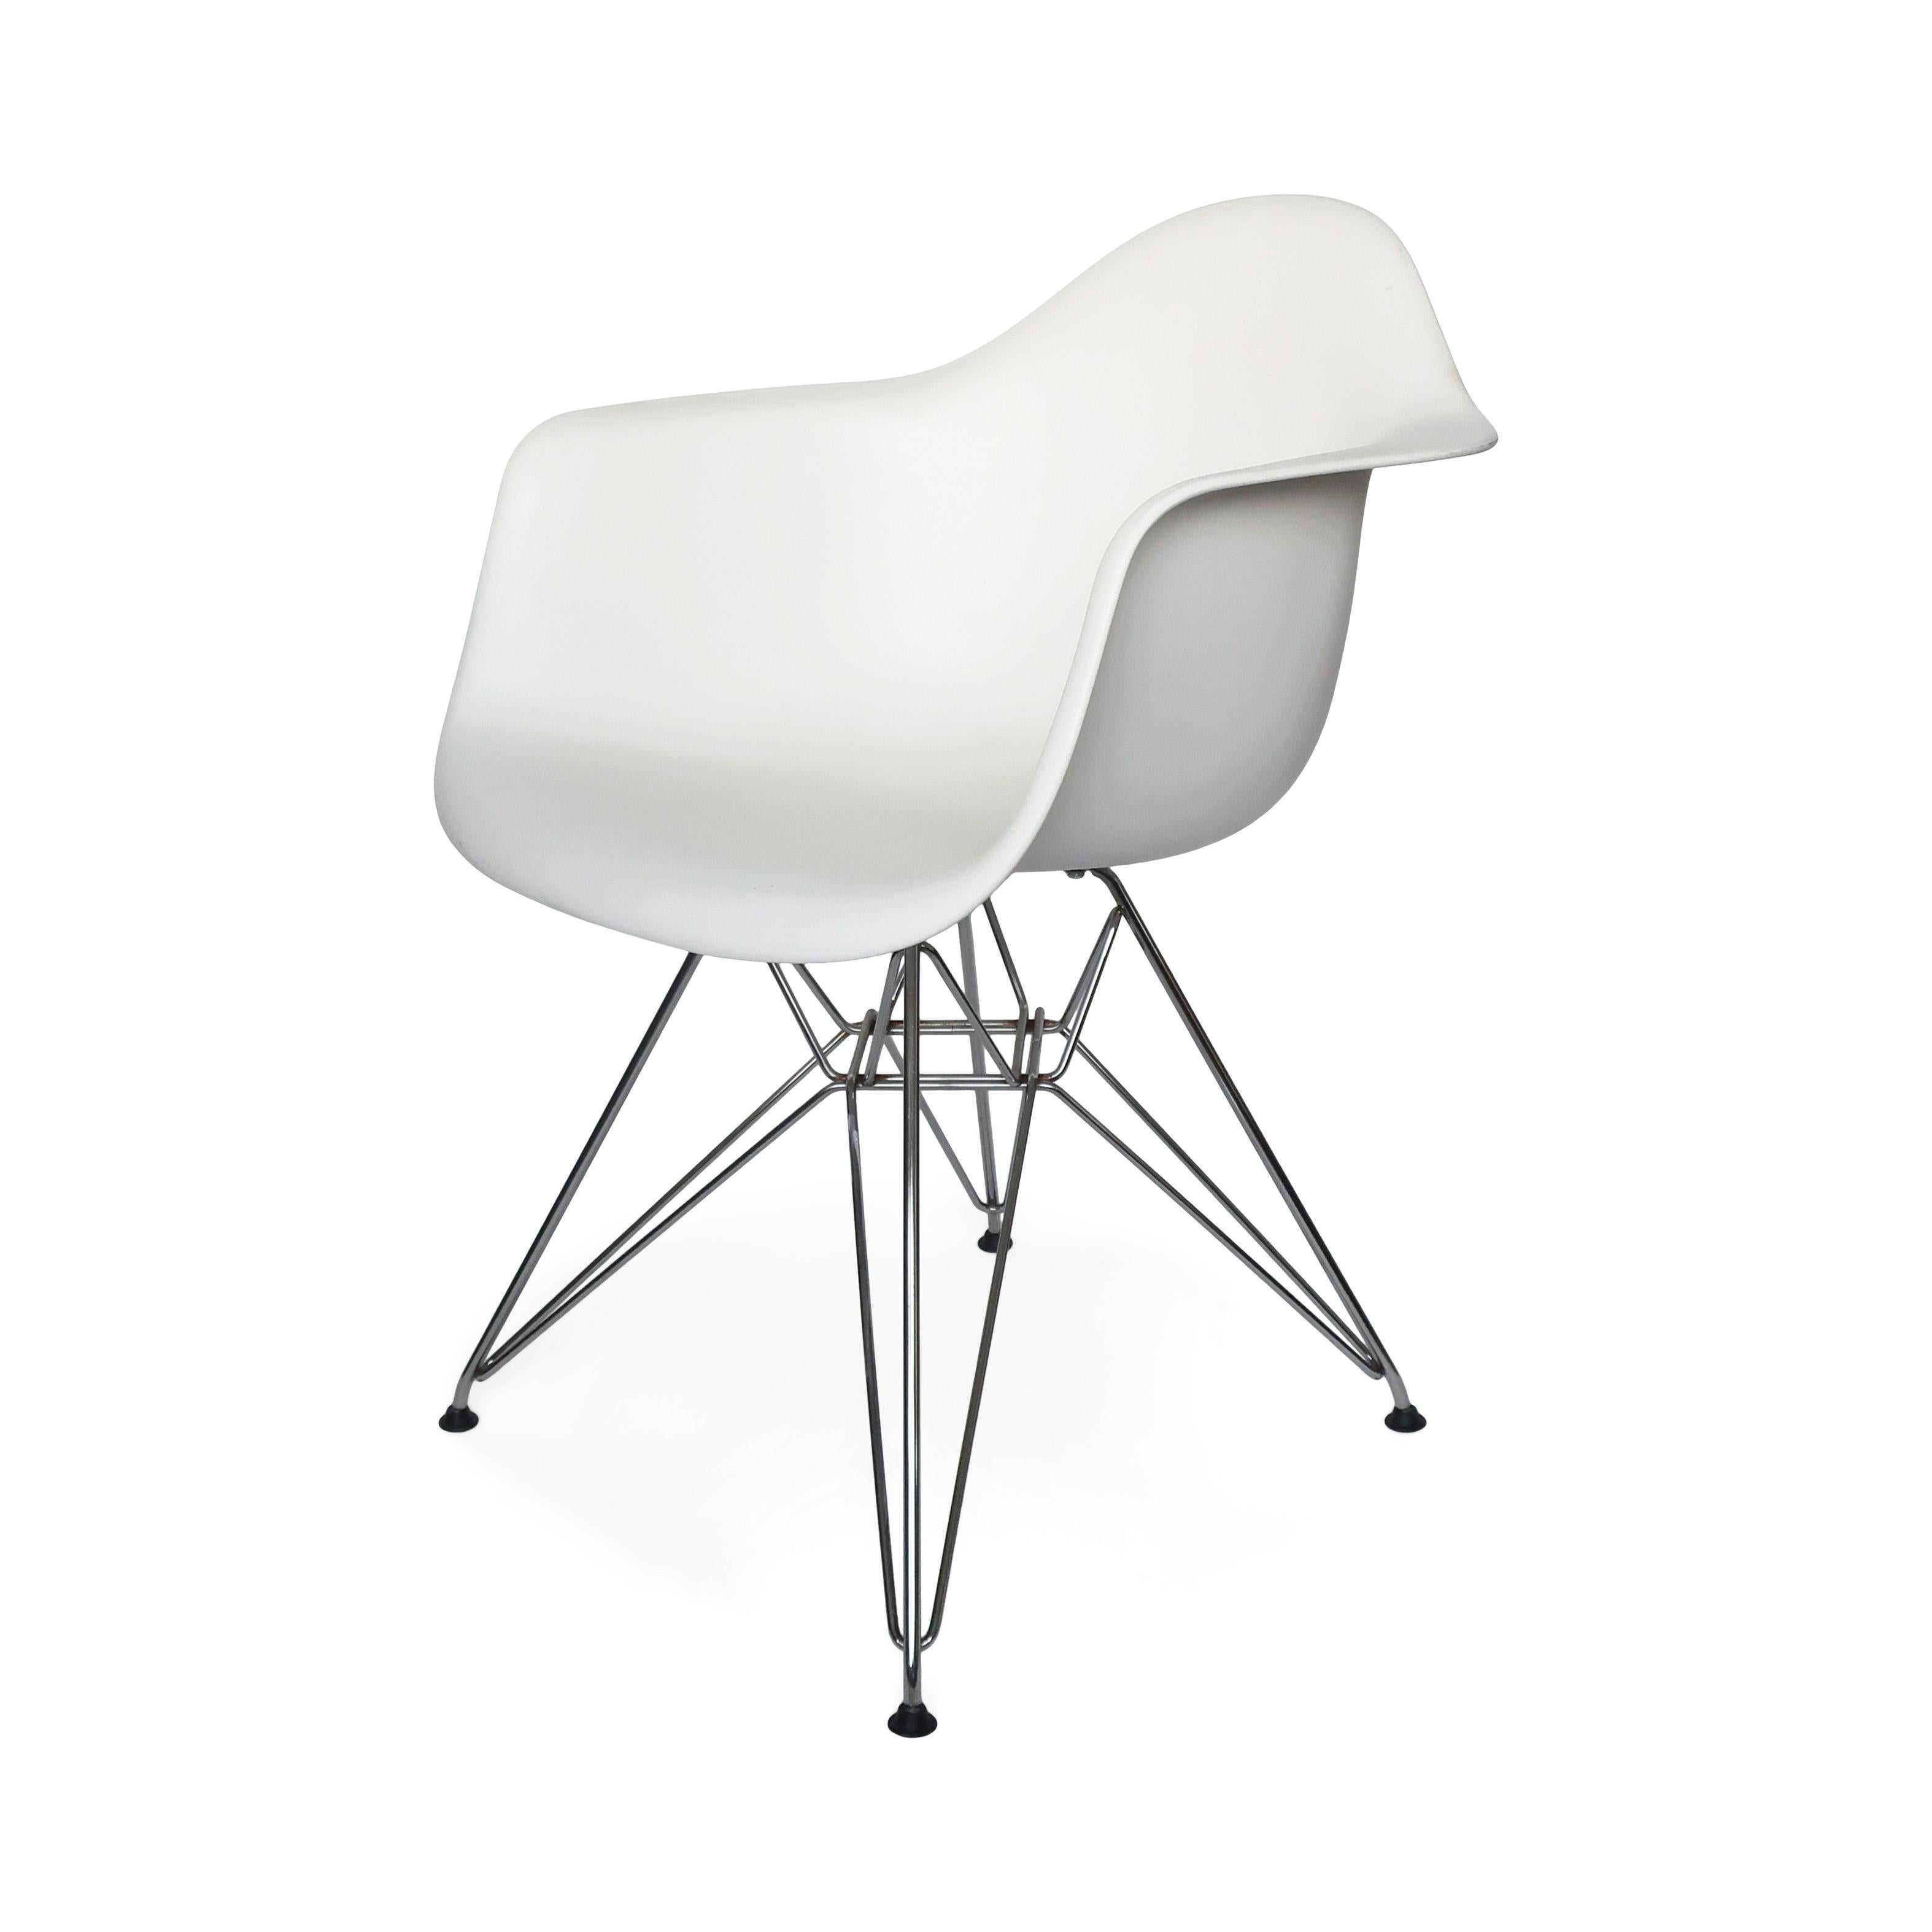 A classic molded armchairs designed by Ray and Charles Eames for Herman Miller. A white plastic chair on a chrome Eiffel base. 

In good vintage condition with wear consistent with age and use. Bears the Herman Miller and Eames logos on